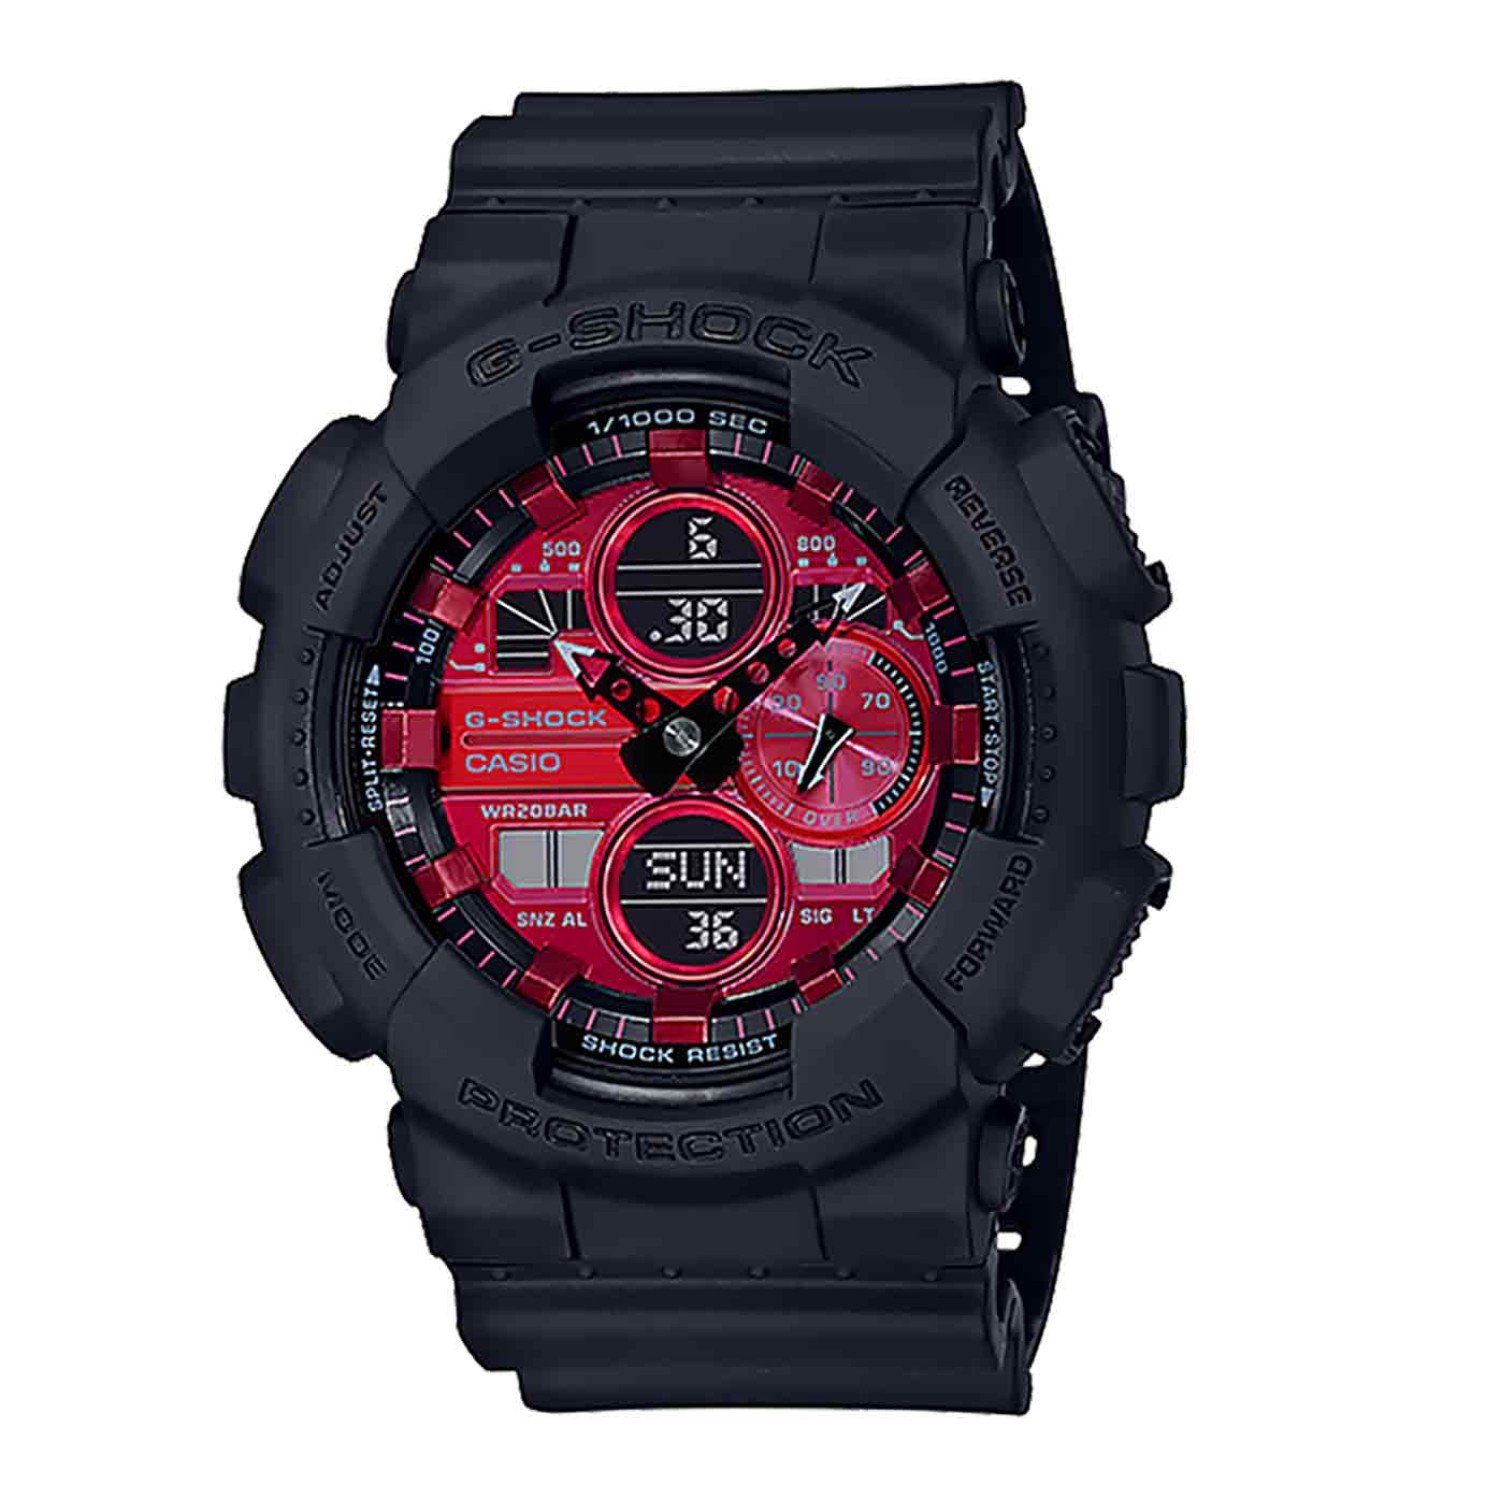 GA140AR-1A Casio G-SHOCK Analog Digital Limited Colour Series Watch. G-SHOCK have released a  new red colour series that exude high energy. Base models are the original square face DW-5600, the plastic and metal GAS-100, the tough and bold GA-700, and the